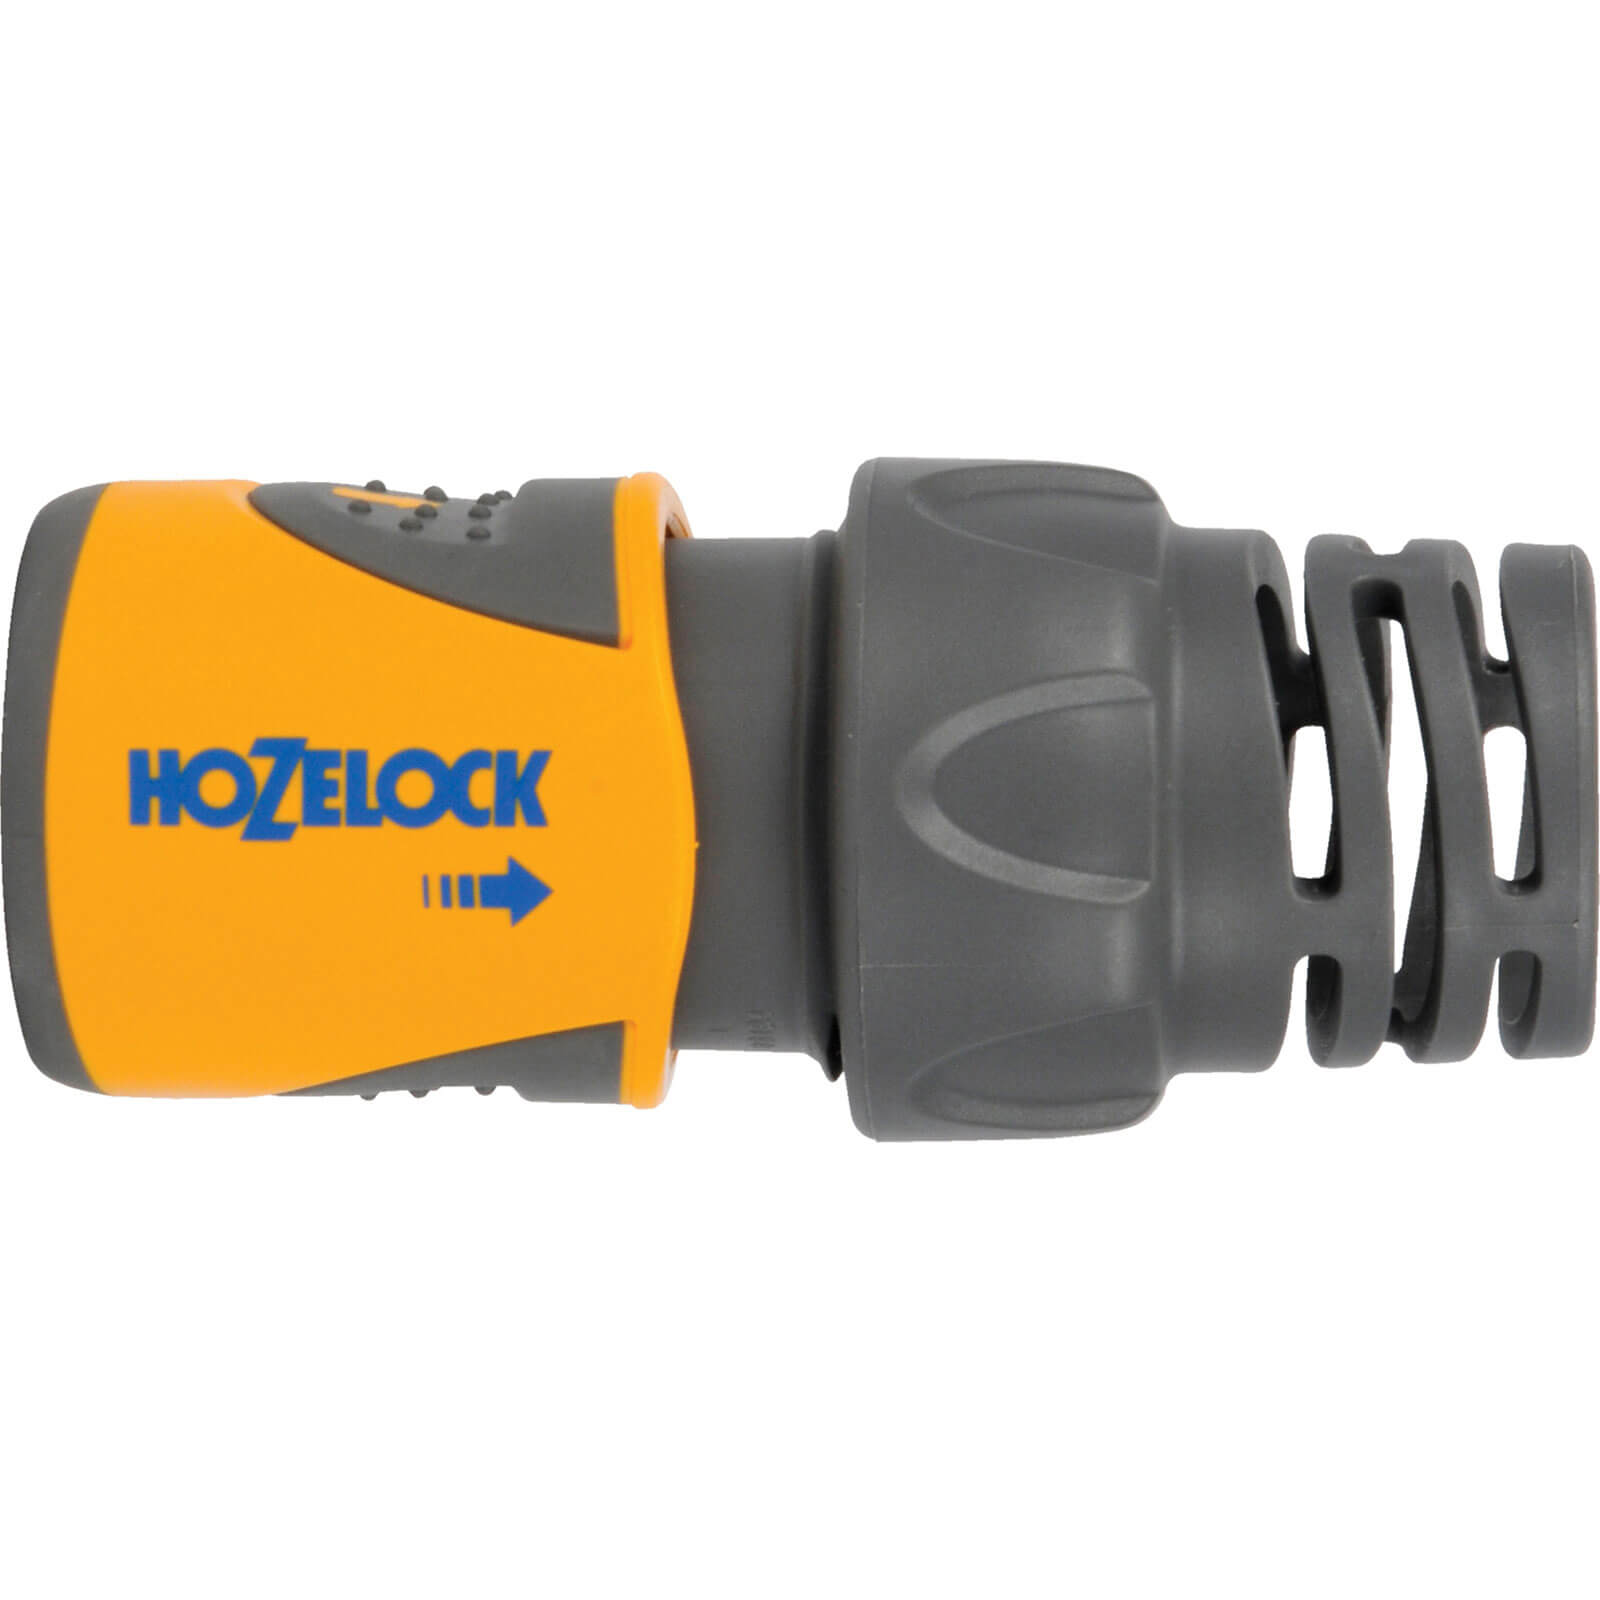 Hozelock Flexible Plastic Hose End Connector for 19mm (3/4") Hose Pipe